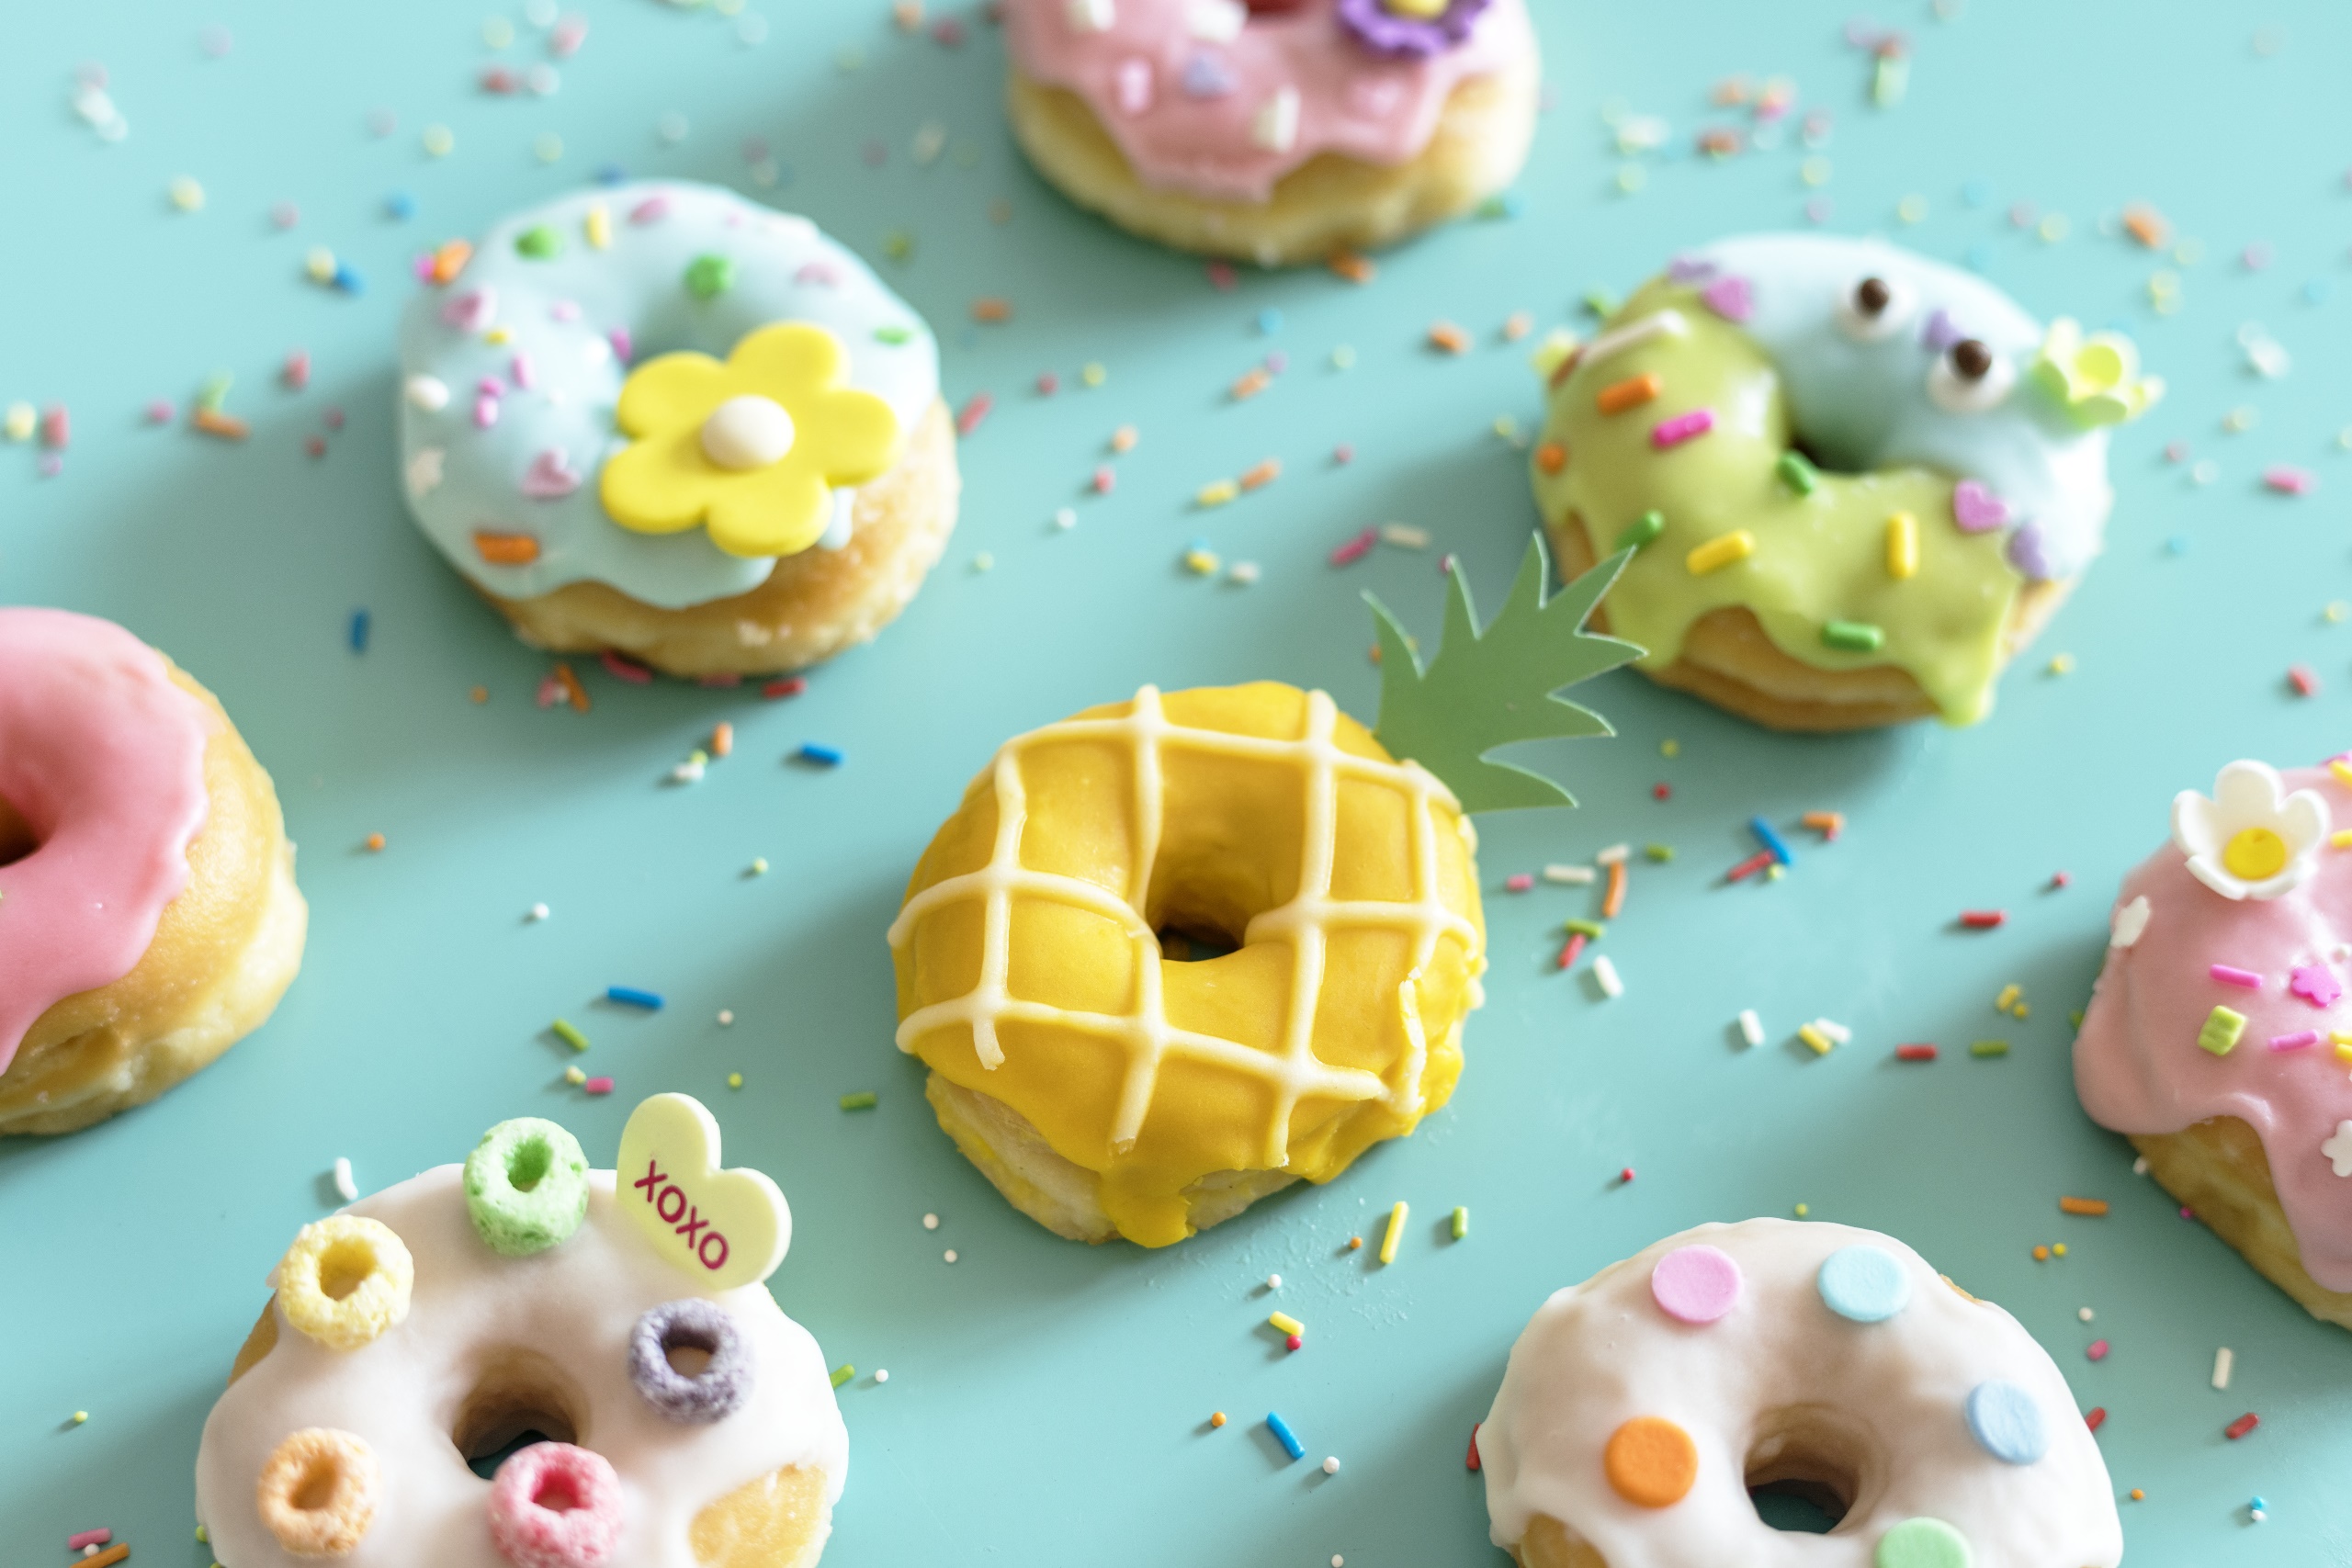 General 2560x1707 food sweets colorful donut